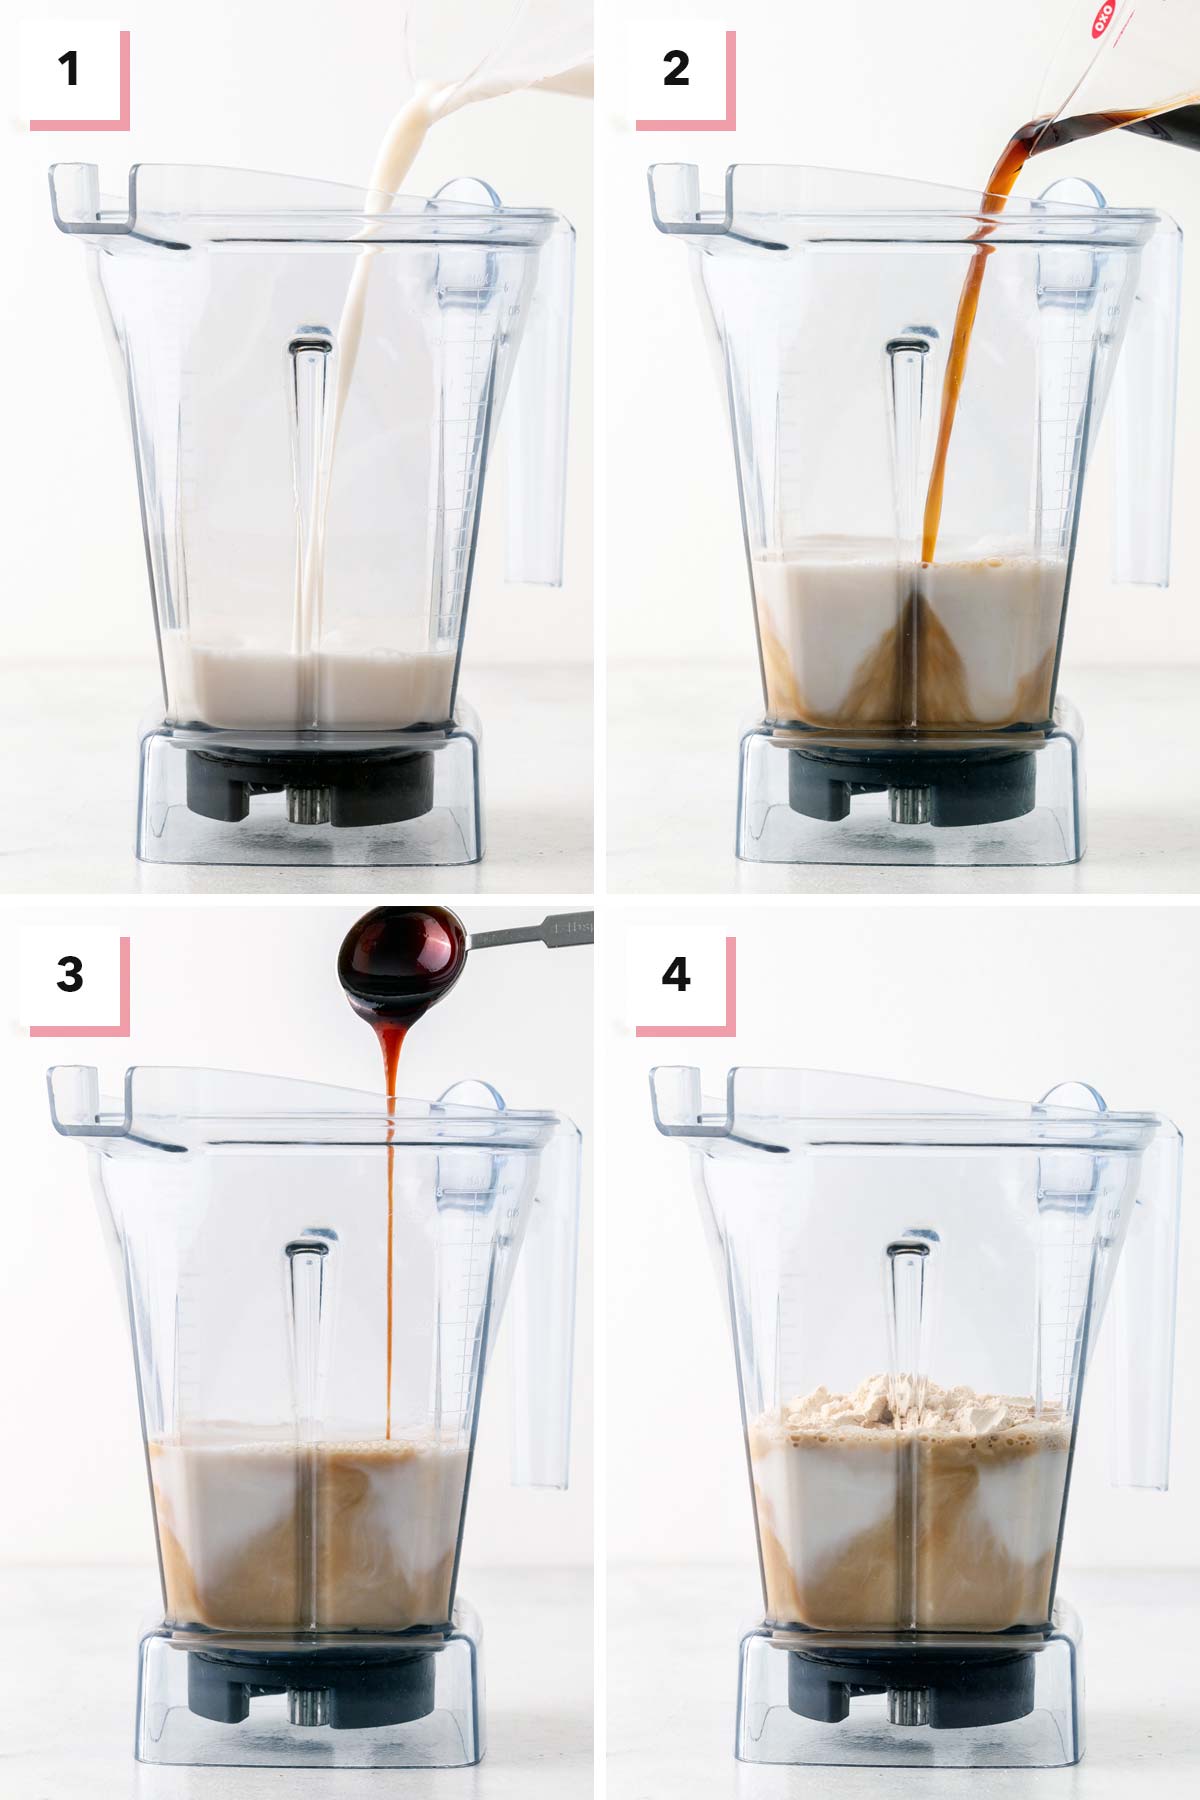 Steps for making a coffee protein shake. 